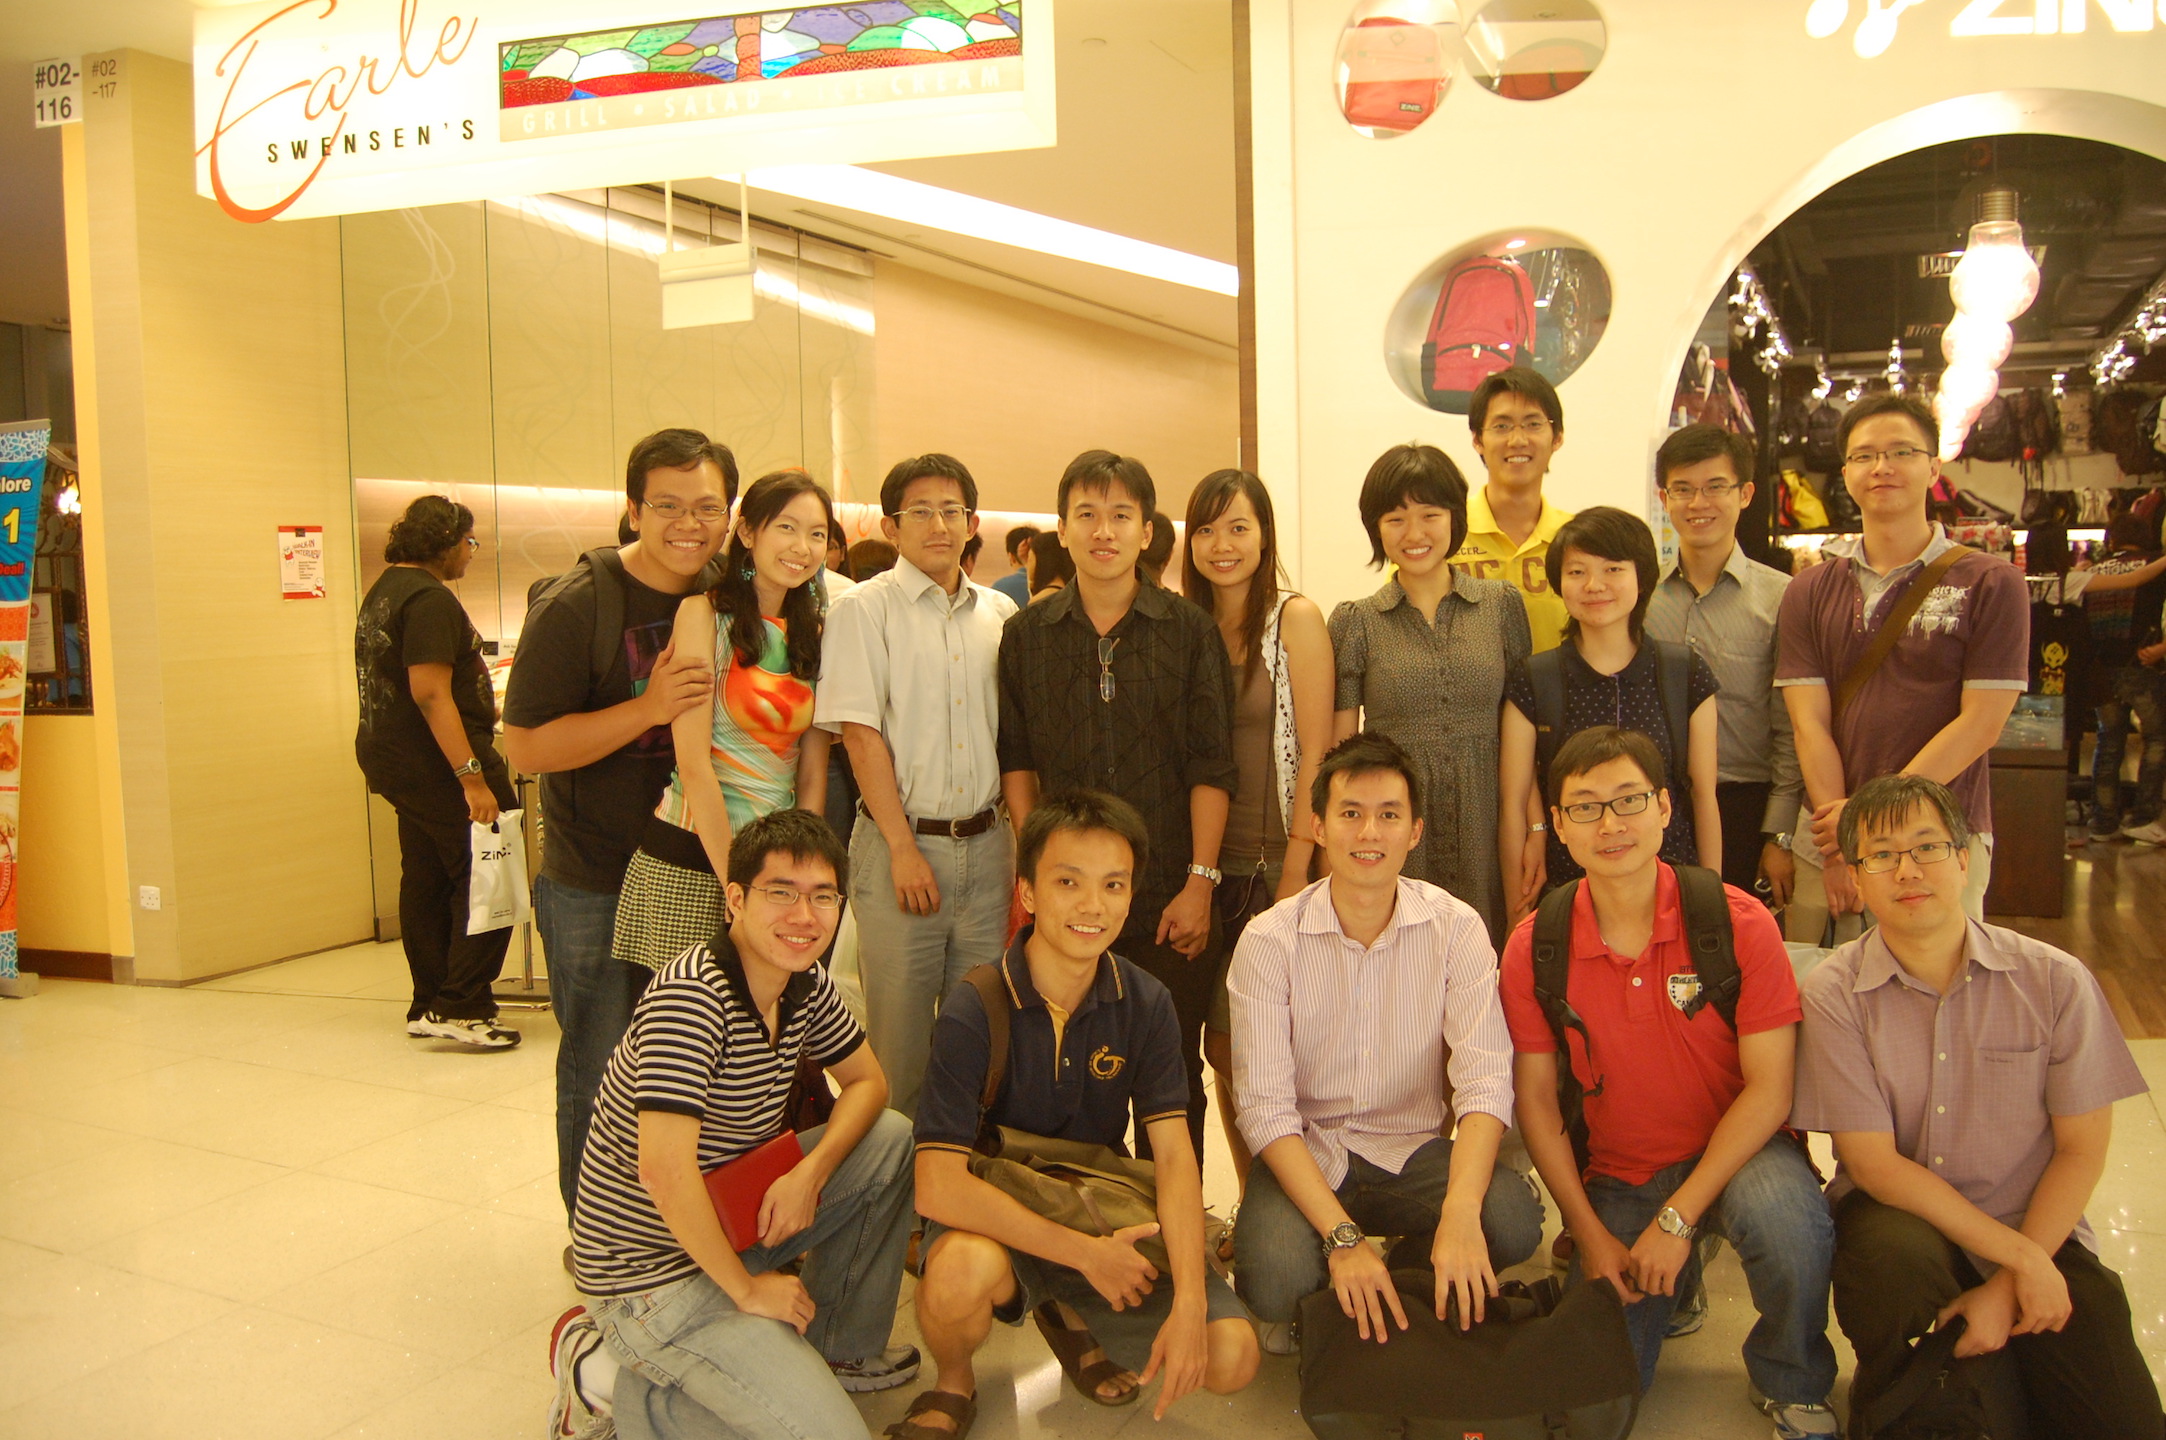 <b>28 Jan 2011 - Earle Swensen's @ Vivo </b><br> Left to Right: Back row: Jesse and friend, Kaz, Thang, Nguyet, Tamisa, Aobo, Chen Tao, Jun Ping, Zhao Jin Front row: Yipeng, Shawn, Low Wee, Ziheng, Min